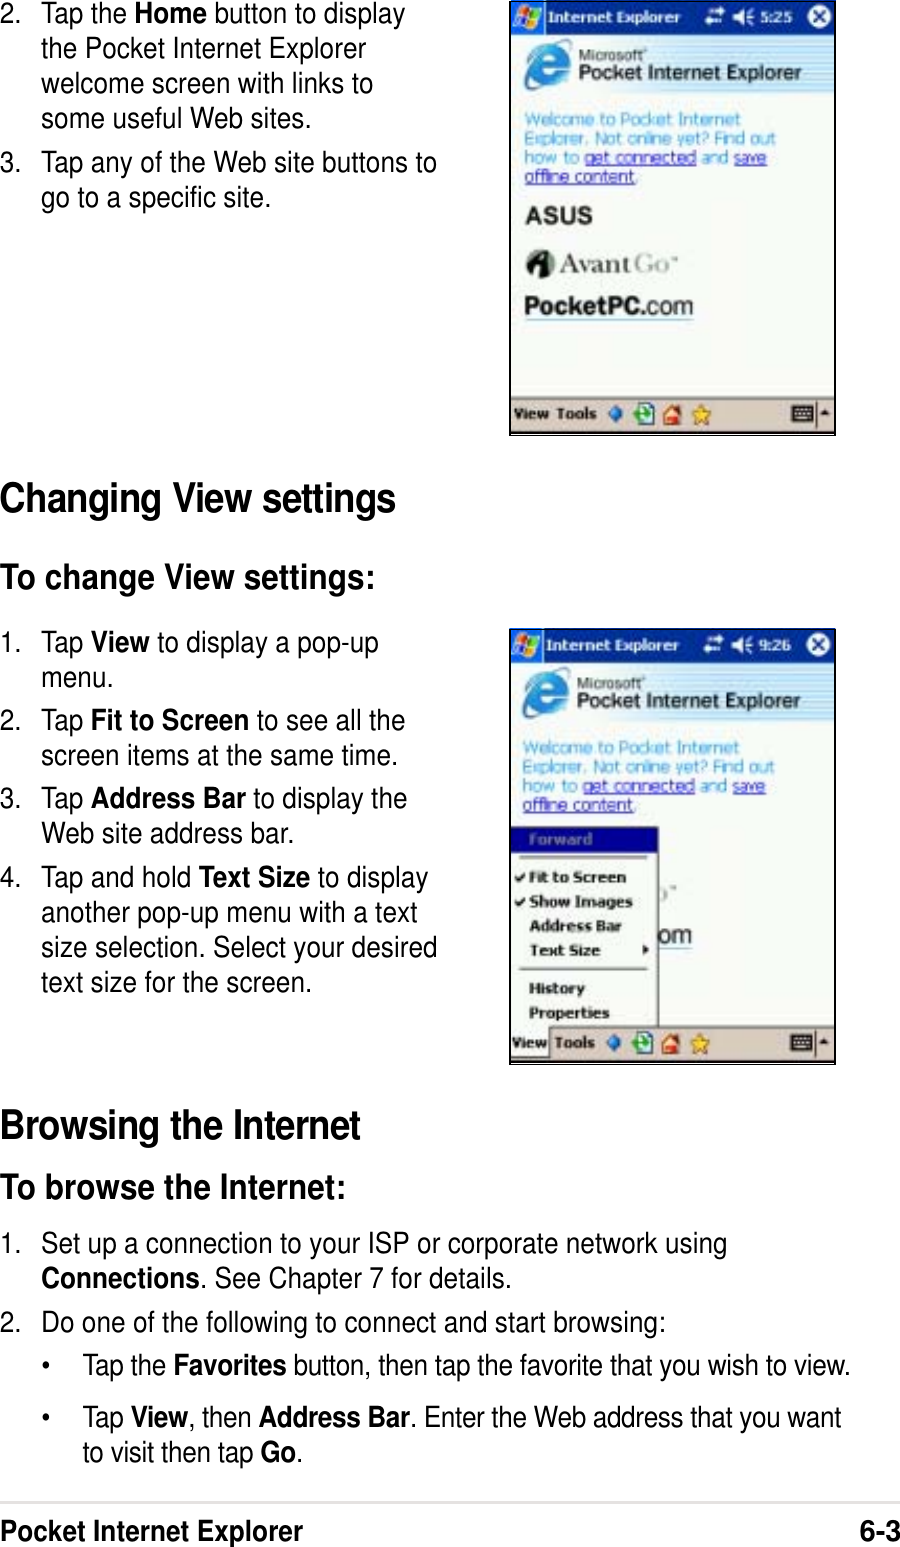 Pocket Internet Explorer6-32. Tap the Home button to displaythe Pocket Internet Explorerwelcome screen with links tosome useful Web sites.3. Tap any of the Web site buttons togo to a specific site.Changing View settingsTo change View settings:1. Tap View to display a pop-upmenu.2. Tap Fit to Screen to see all thescreen items at the same time.3. Tap Address Bar to display theWeb site address bar.4. Tap and hold Text Size to displayanother pop-up menu with a textsize selection. Select your desiredtext size for the screen.Browsing the InternetTo browse the Internet:1. Set up a connection to your ISP or corporate network usingConnections. See Chapter 7 for details.2. Do one of the following to connect and start browsing:• Tap the Favorites button, then tap the favorite that you wish to view.• Tap View, then Address Bar. Enter the Web address that you wantto visit then tap Go.